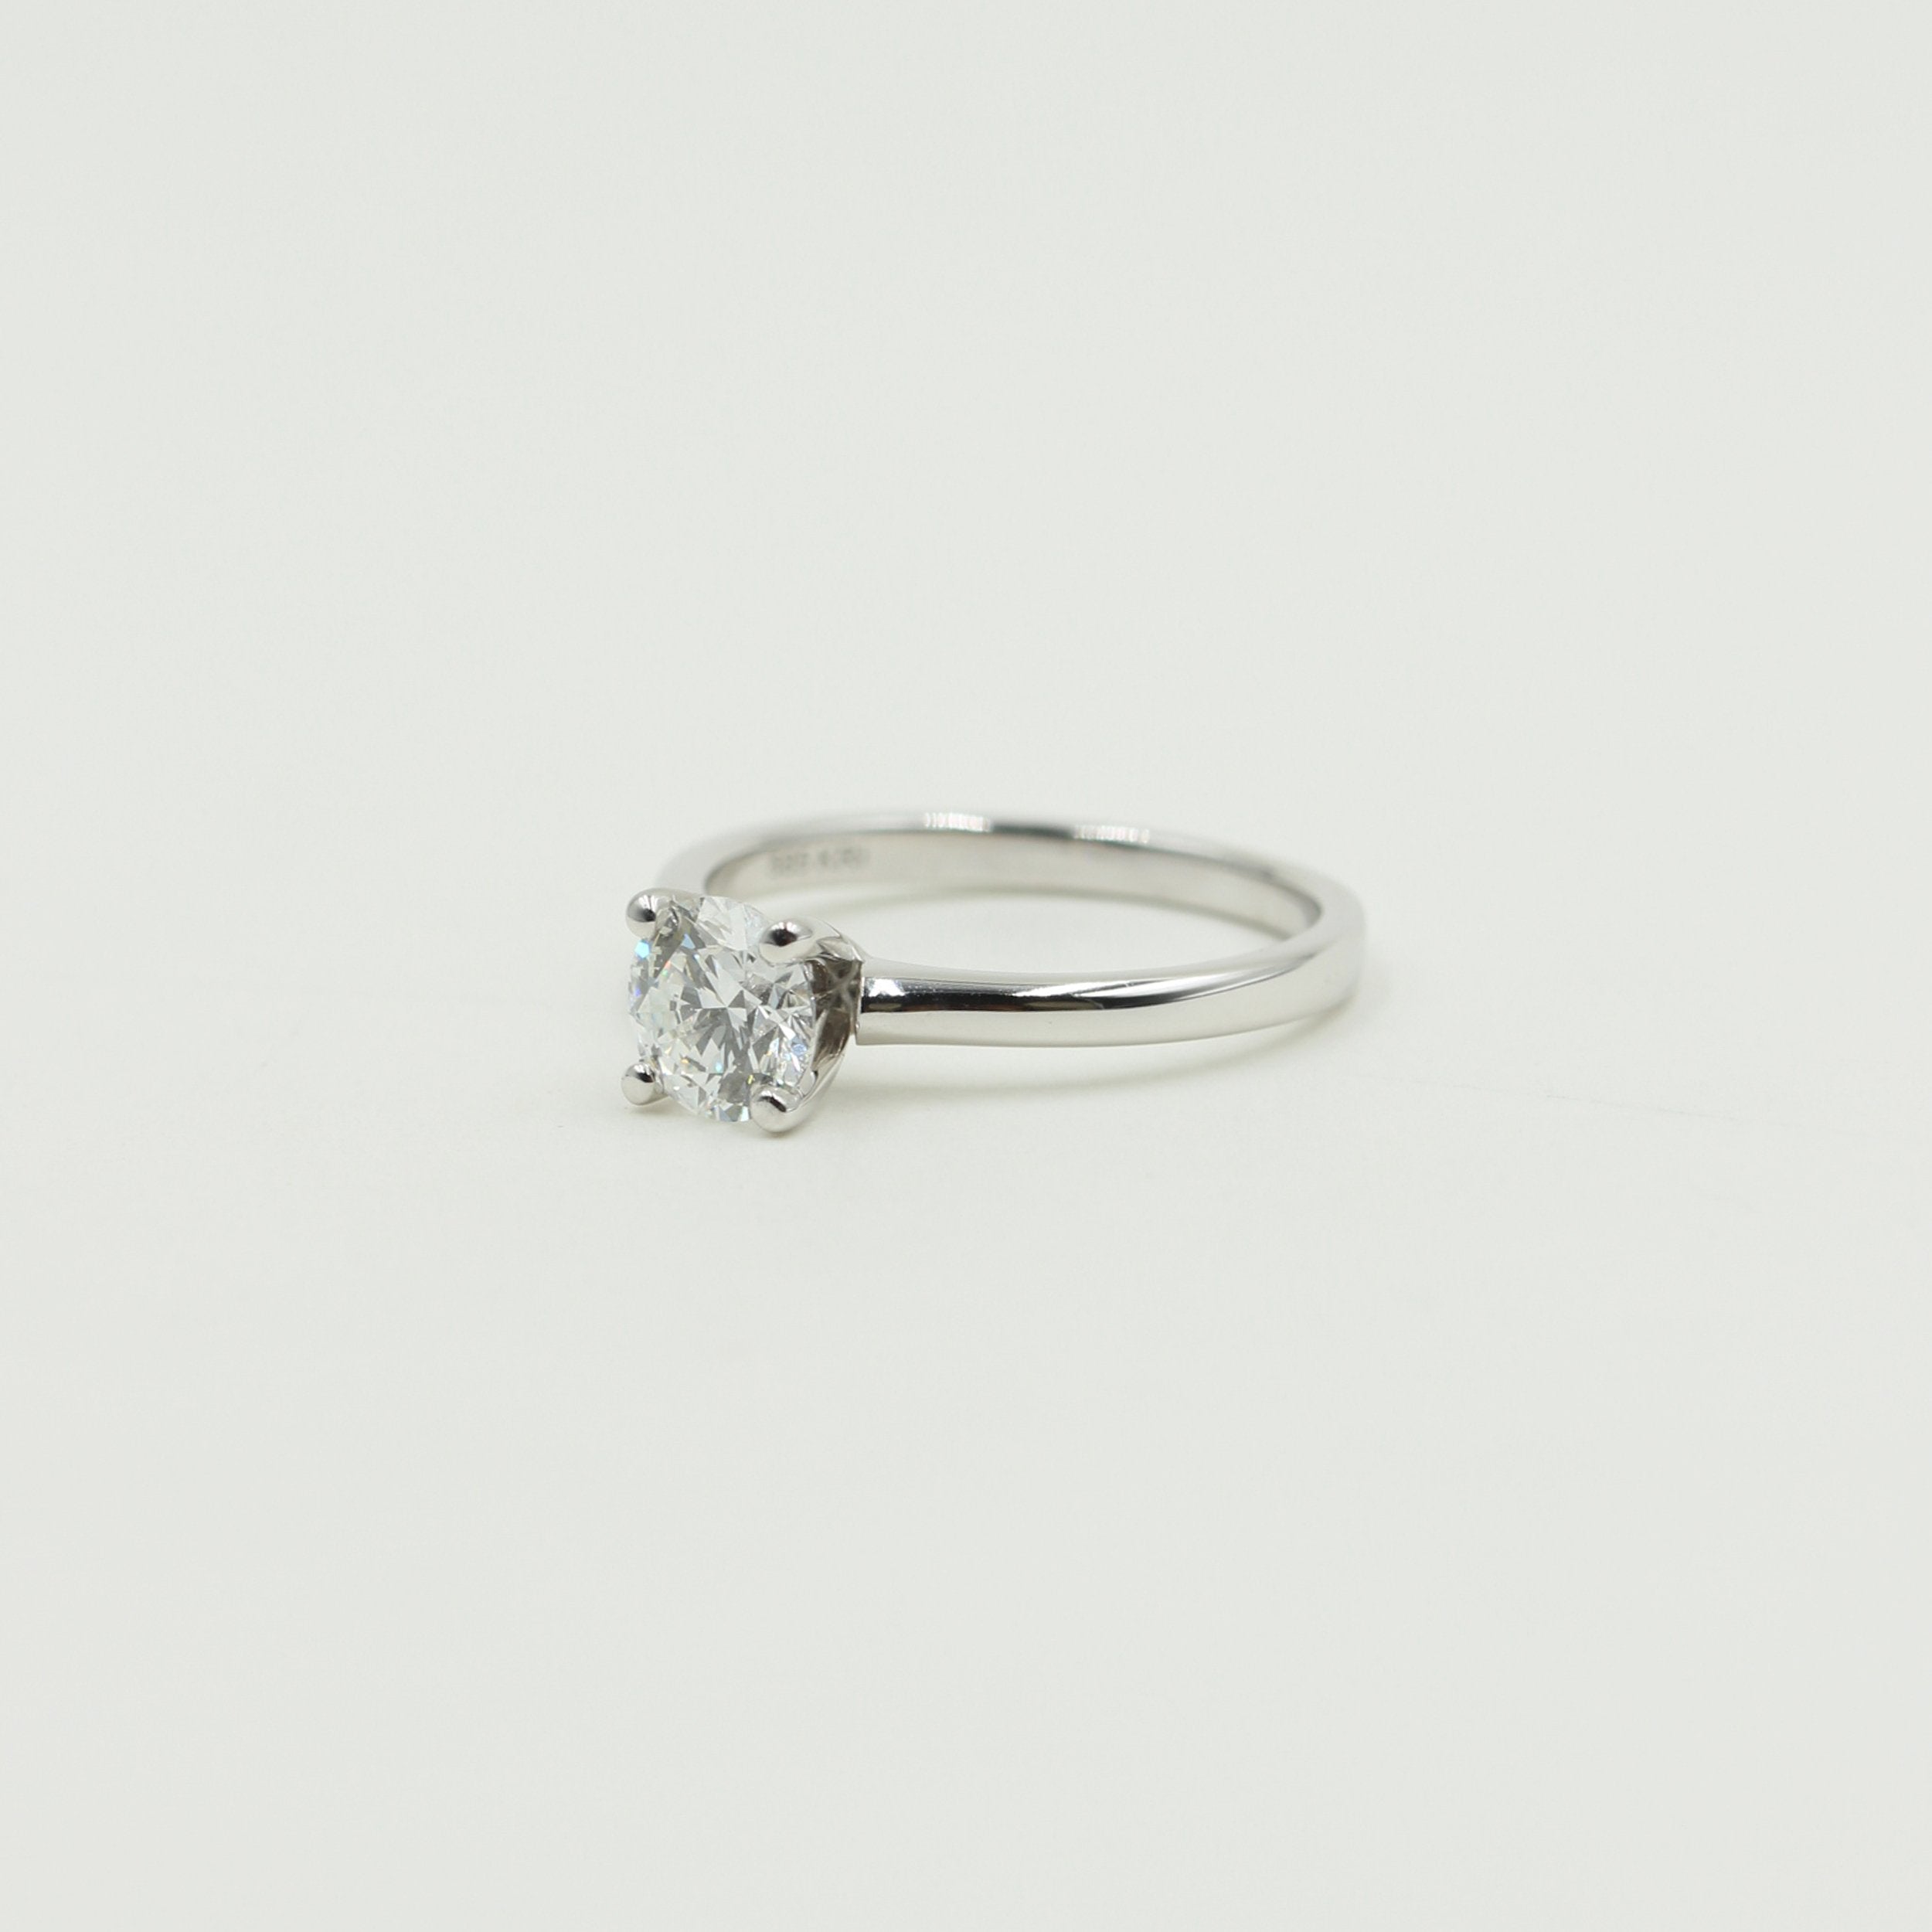 Solitairering m. 0,82 ct. E.SI1